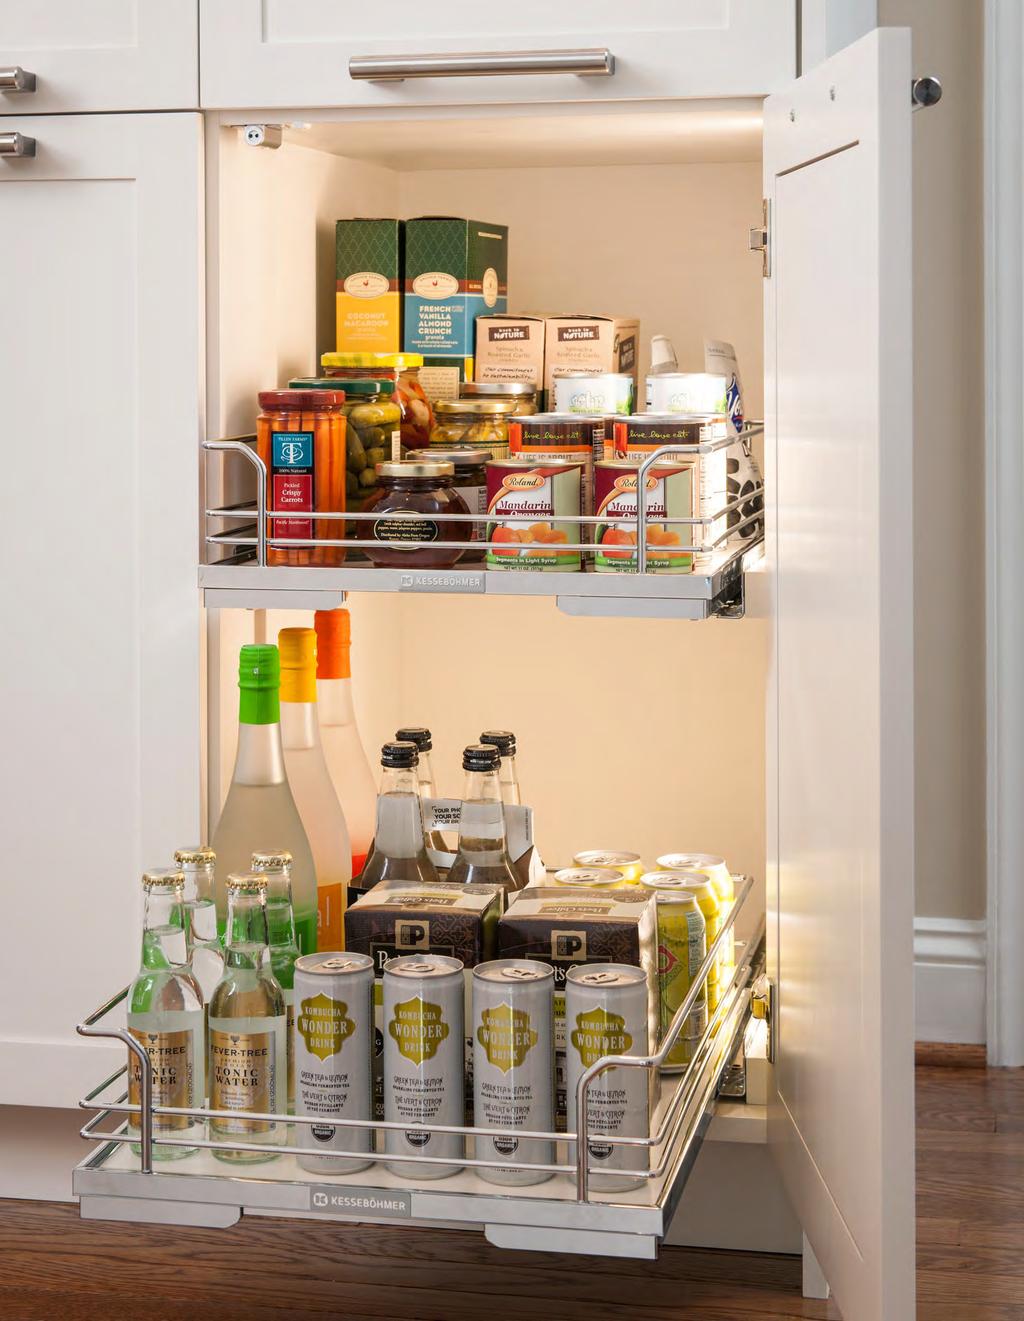 With rollout shelves that install easily with any undermount